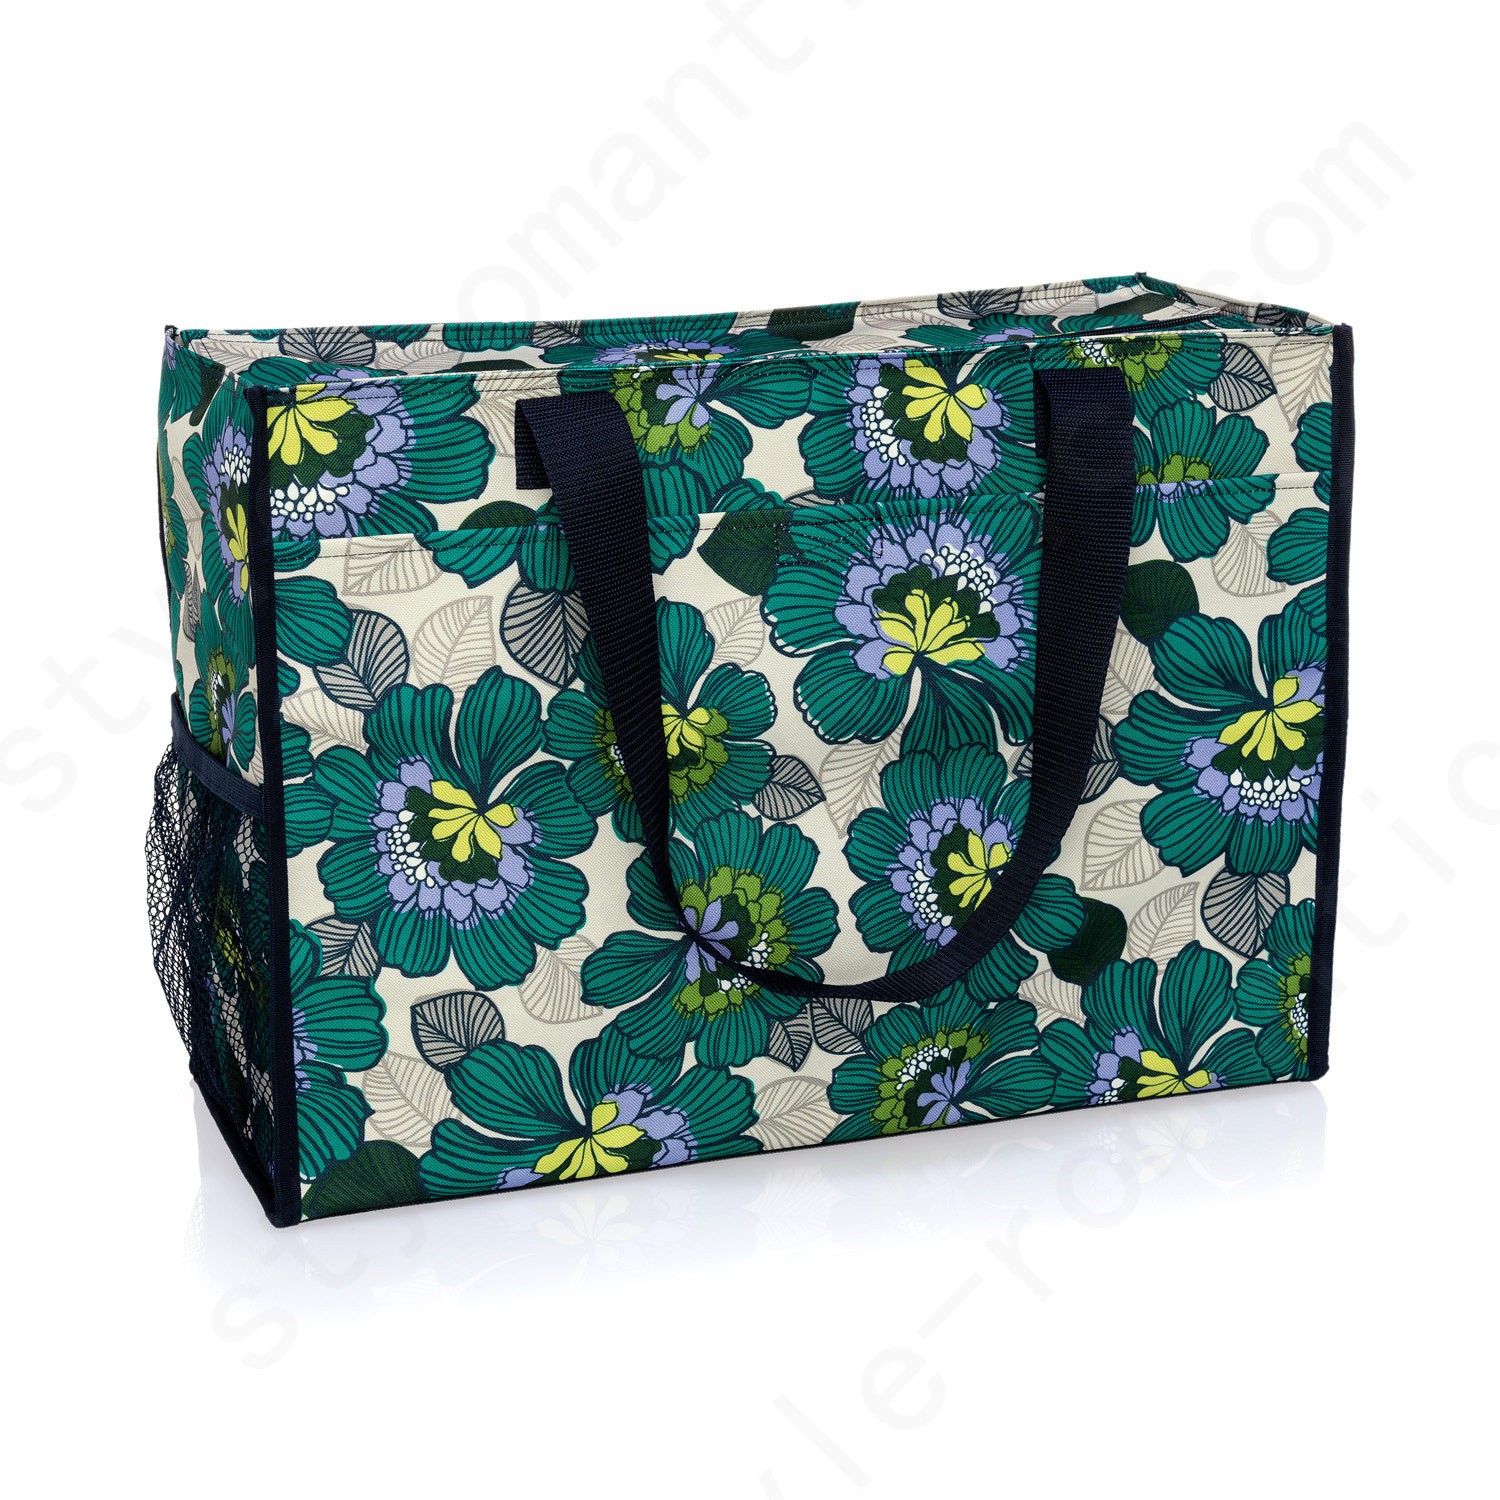 Thirty-One Gifts Deluxe Organizing Utility Tote - Garden Party Bag Accessories - Thirty-One Gifts Deluxe Organizing Utility Tote - Garden Party Bag Accessories